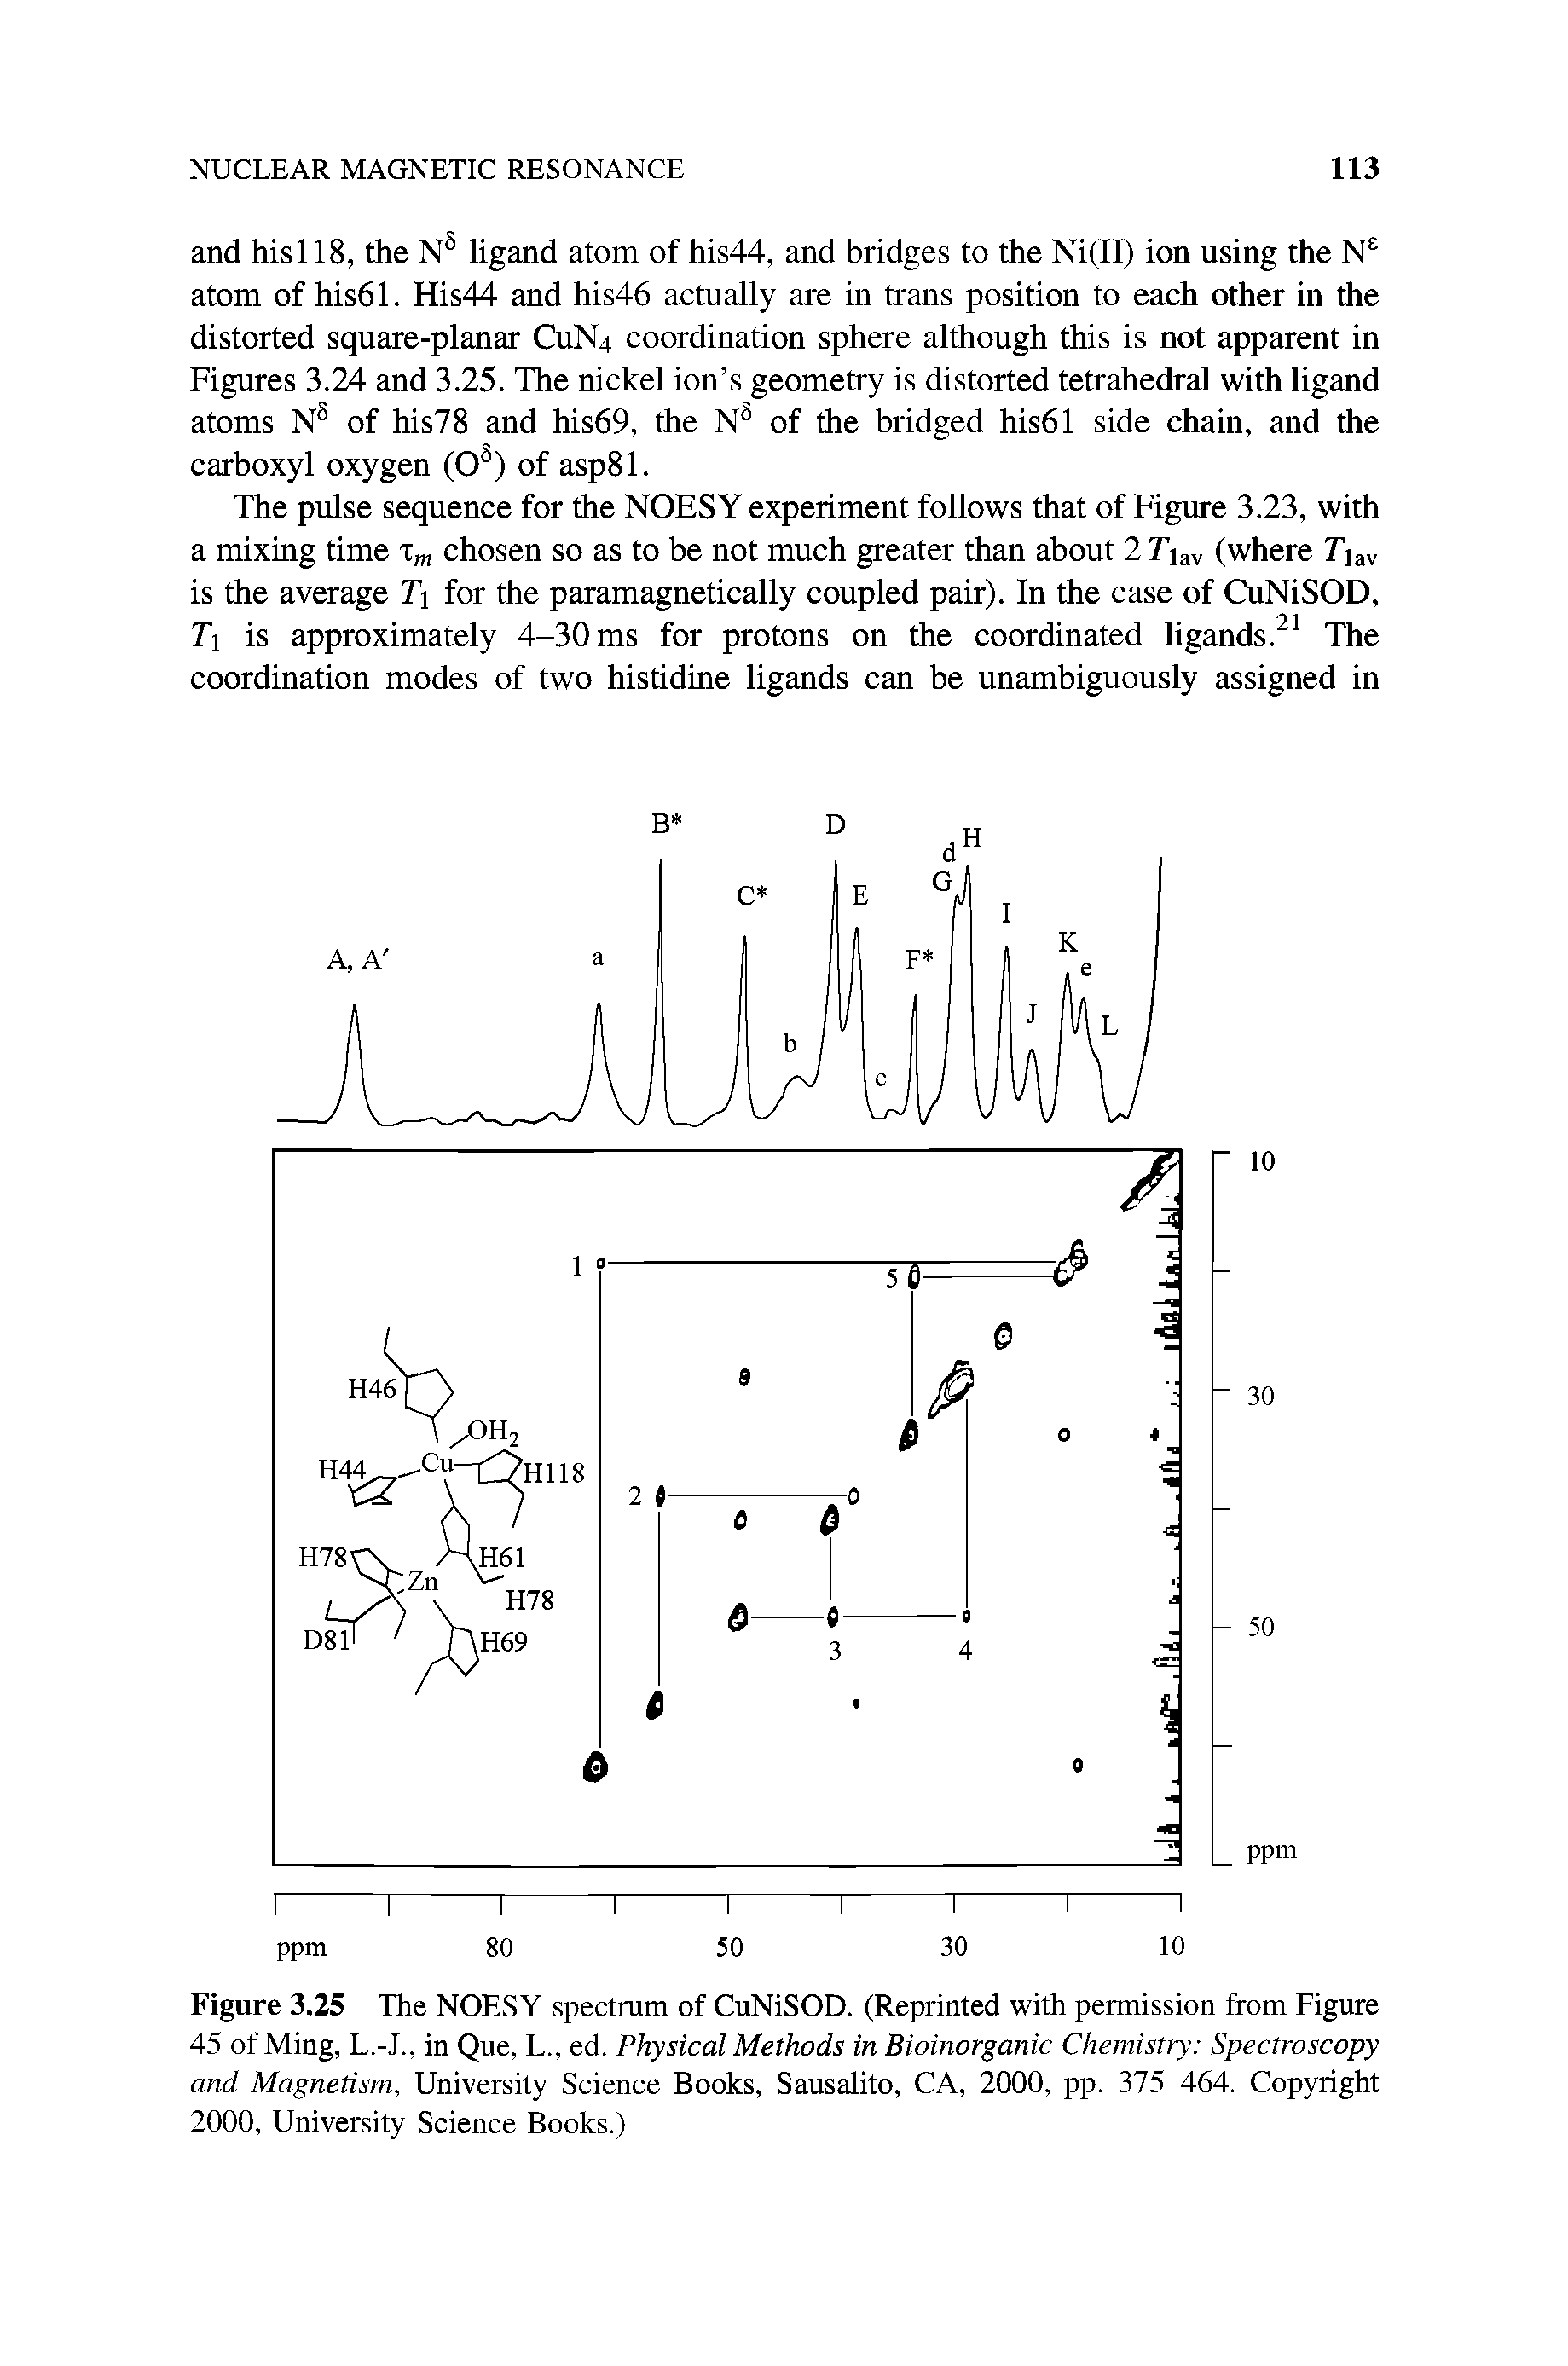 Figure 3.25 The NOESY spectrum of CuNiSOD. (Reprinted with permission from Figure 45 of Ming, L.-J., in Que, L., ed. Physical Methods in Bioinorganic Chemistry Spectroscopy and Magnetism, University Science Books, Sausalito, CA, 2000, pp. 375 -64. Copyright 2000, University Science Books.)...